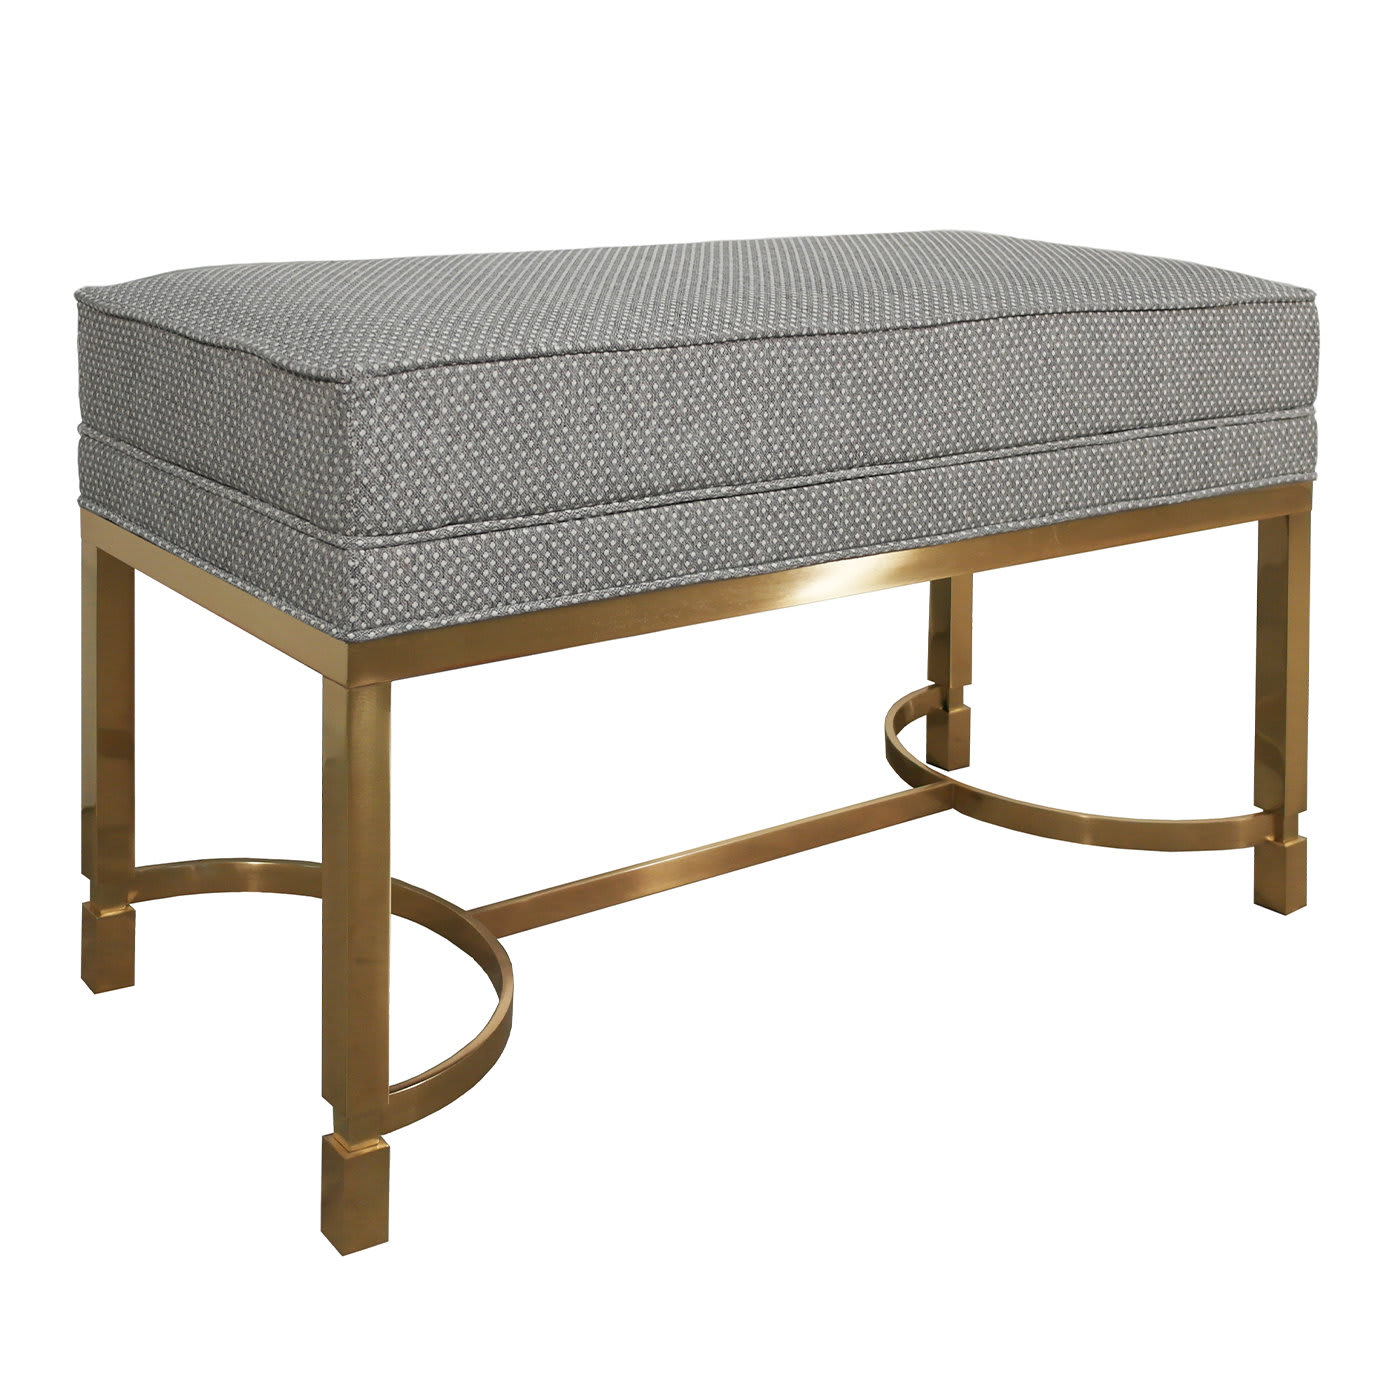 Two-Tone Upholstered Bench - S&L Interni